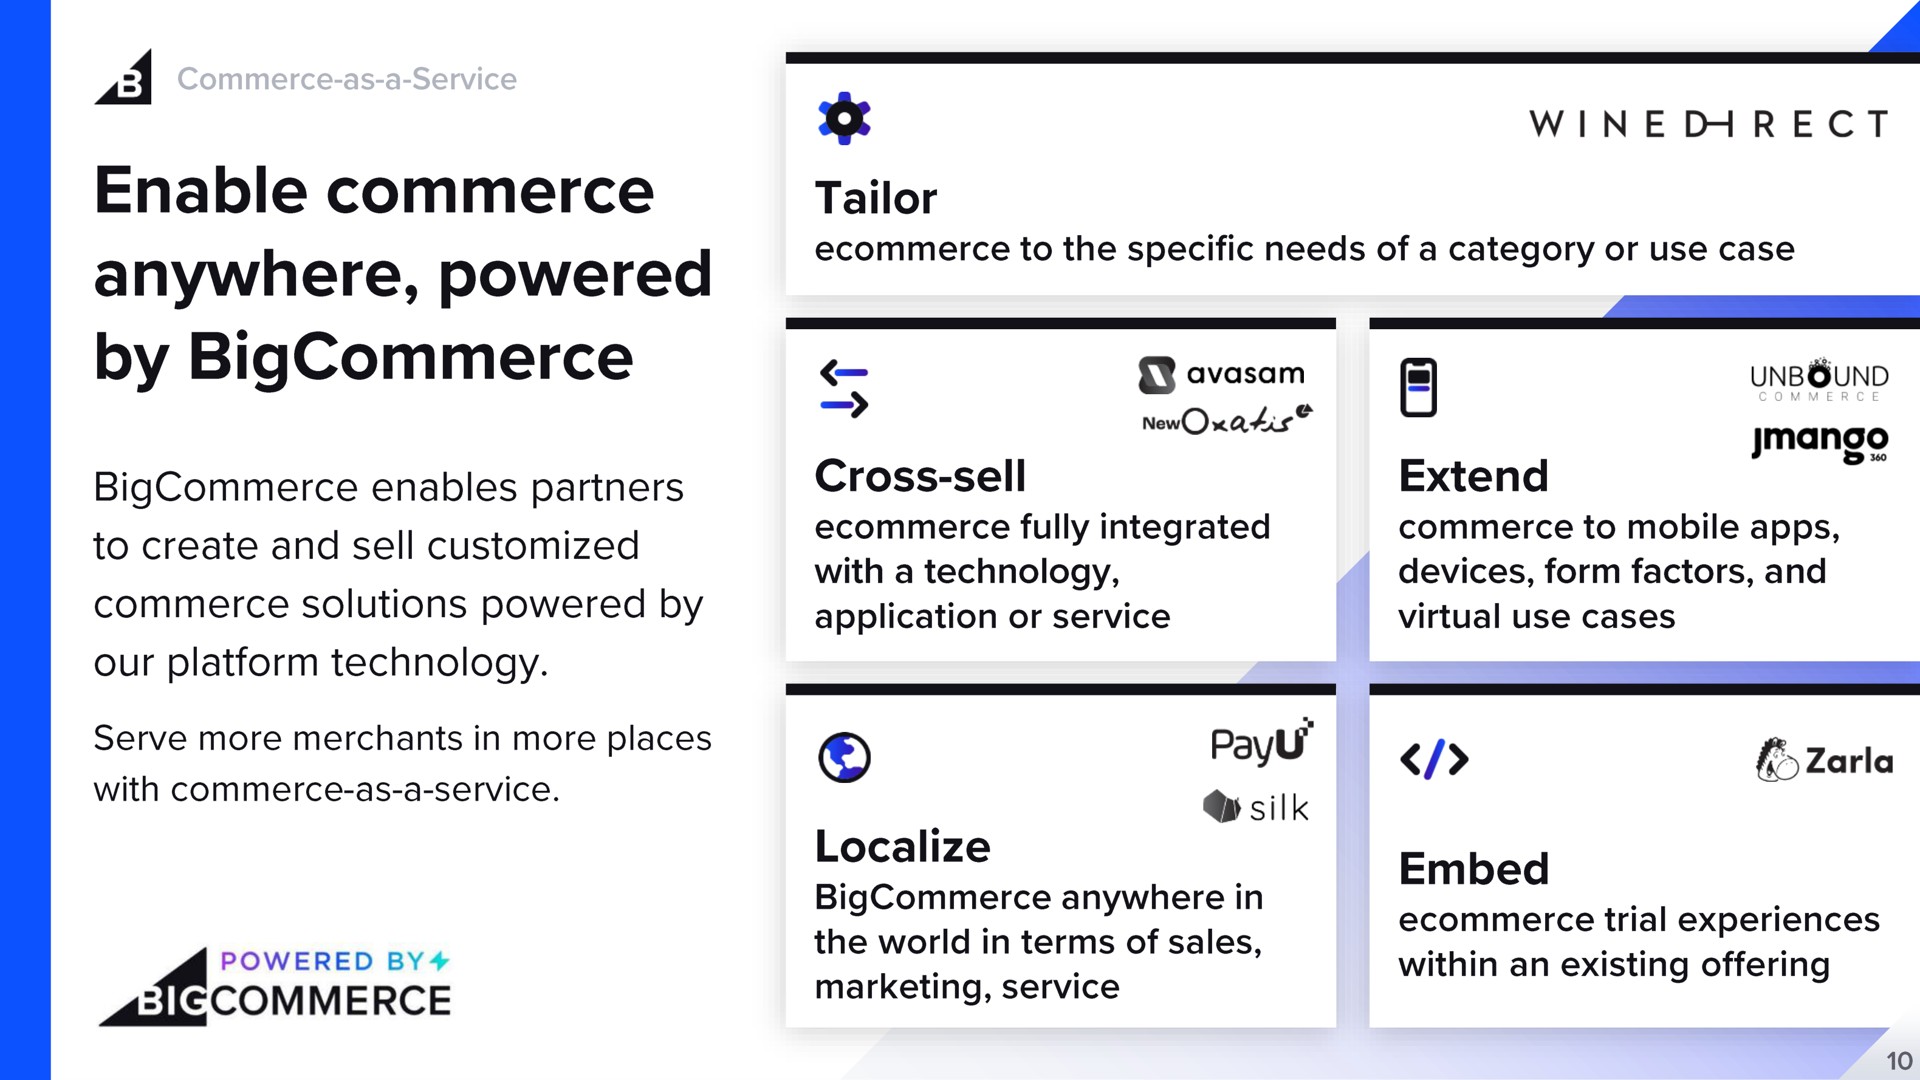 a enable commerce anywhere powered enables partners our technology tailor wine direct i cross sell localize extend embed | BigCommerce